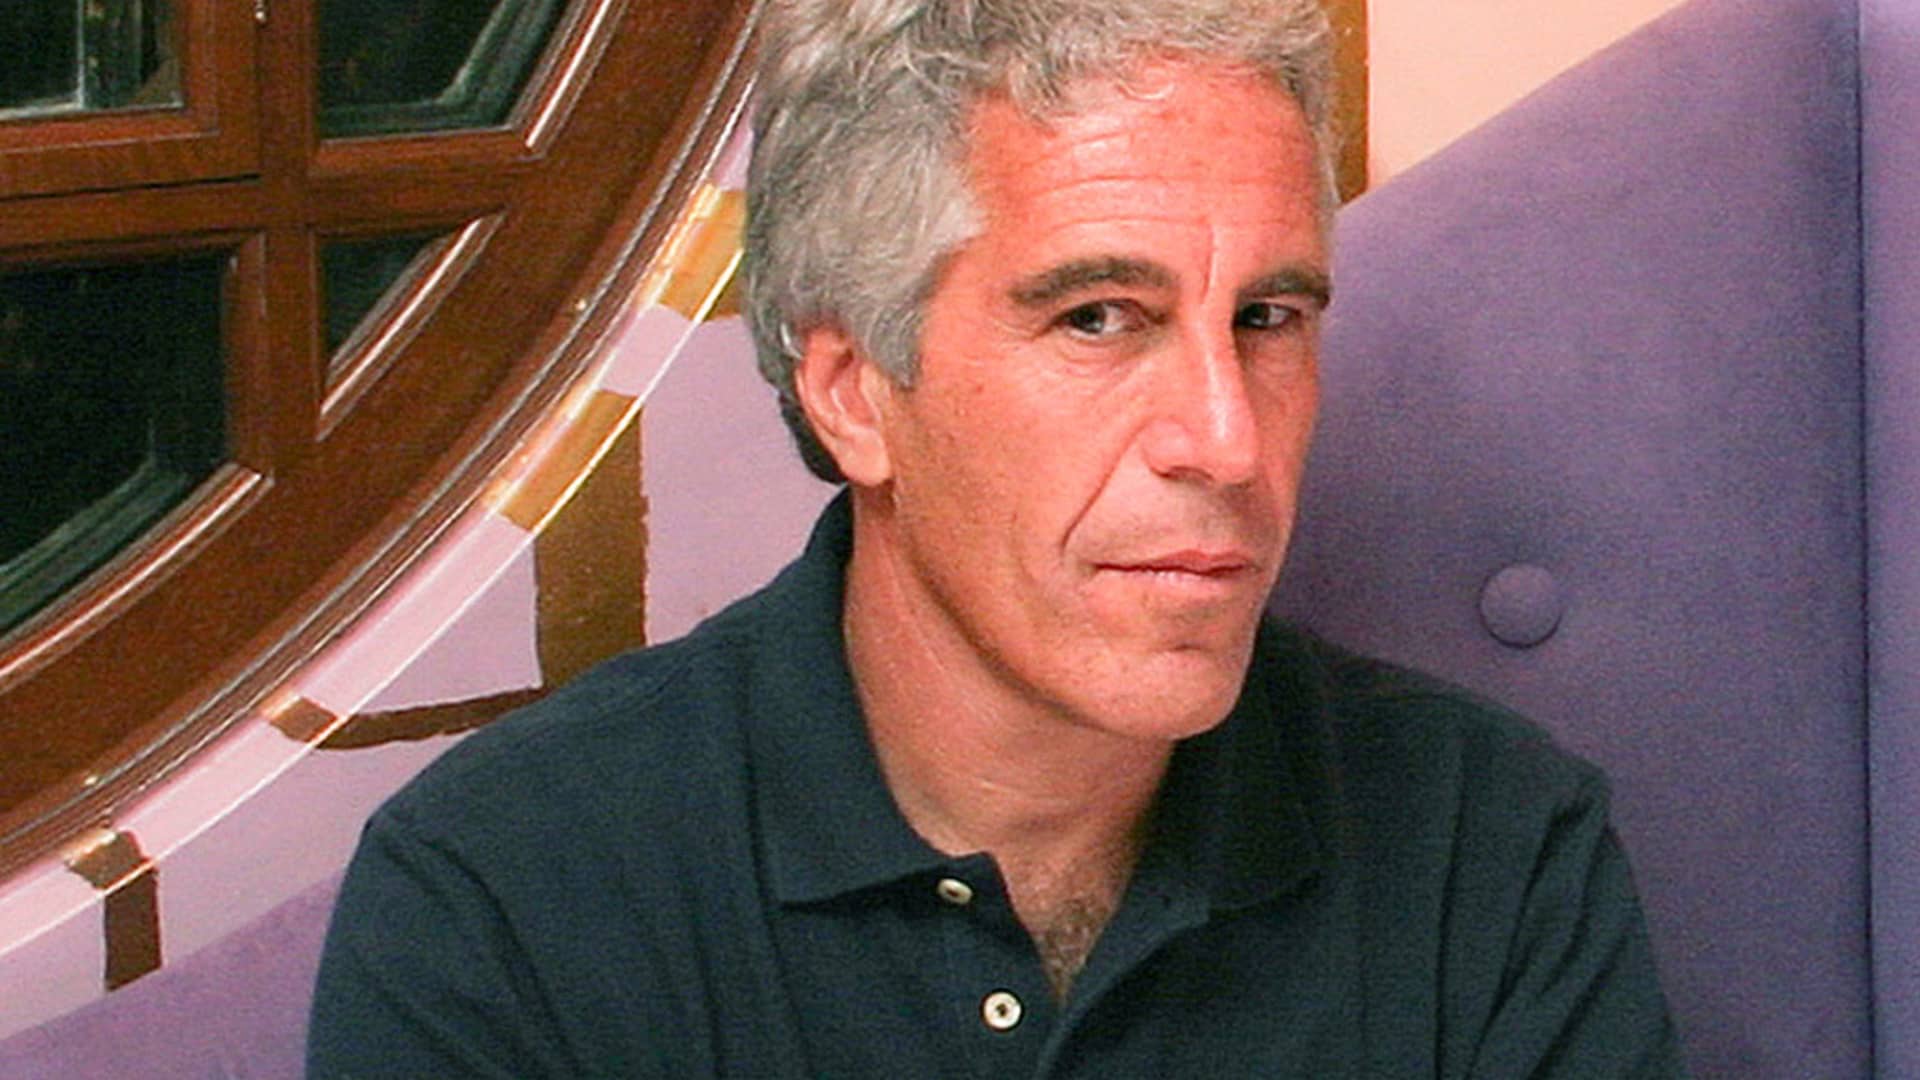 JPMorgan lawful service fees in Jeffrey Epstein sexual intercourse website traffic cases in the vicinity of  million, former exec reveals